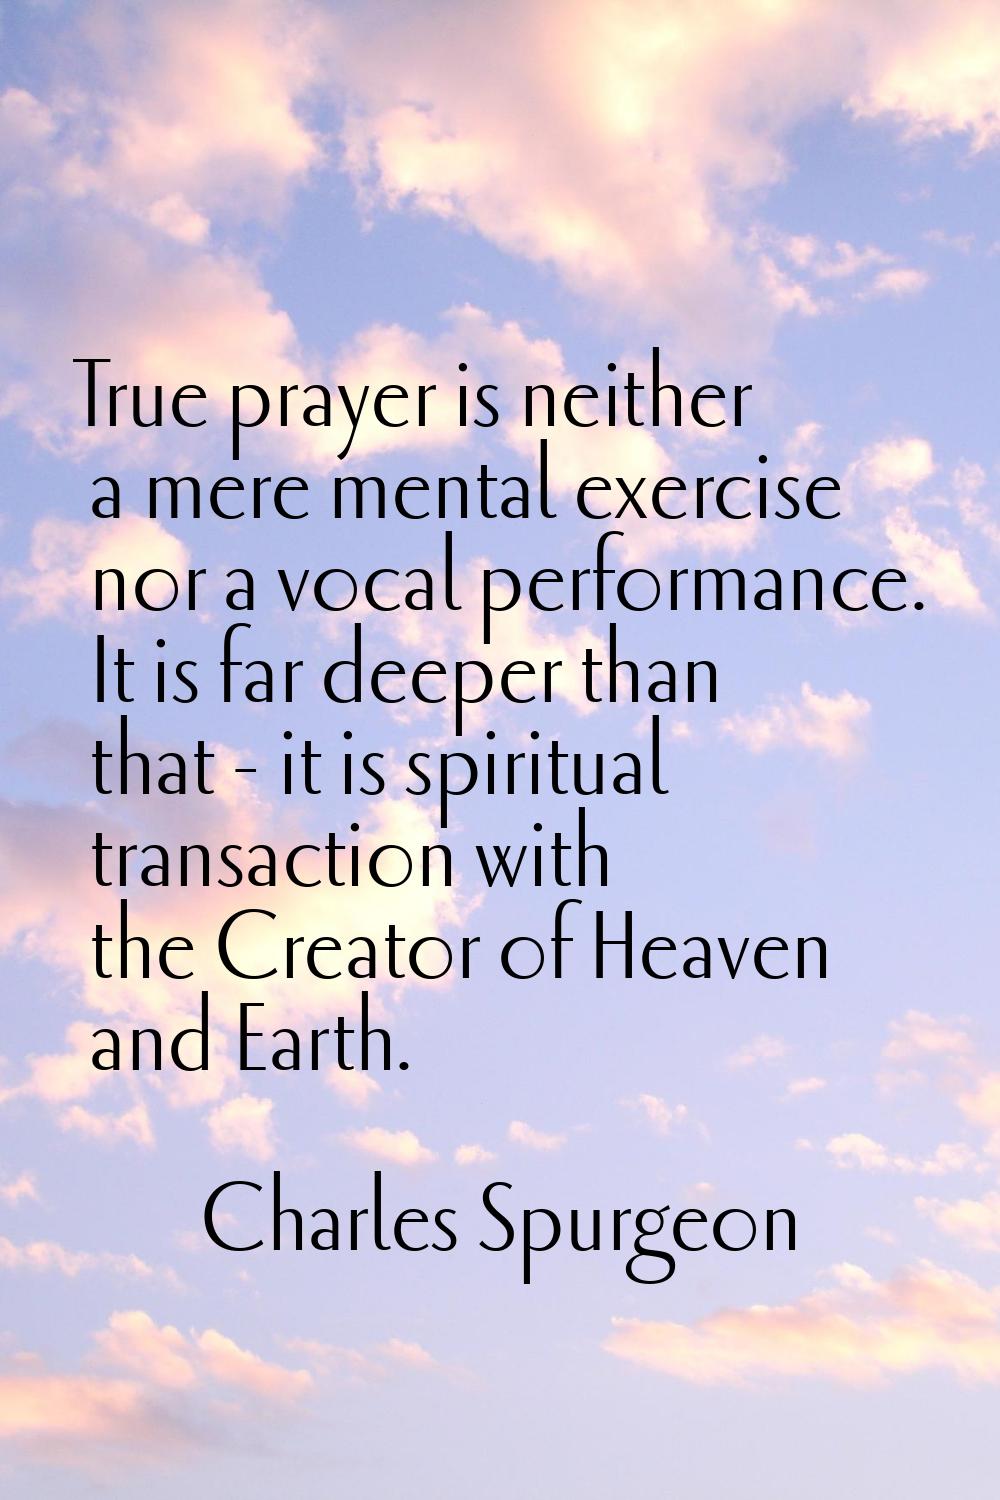 True prayer is neither a mere mental exercise nor a vocal performance. It is far deeper than that -